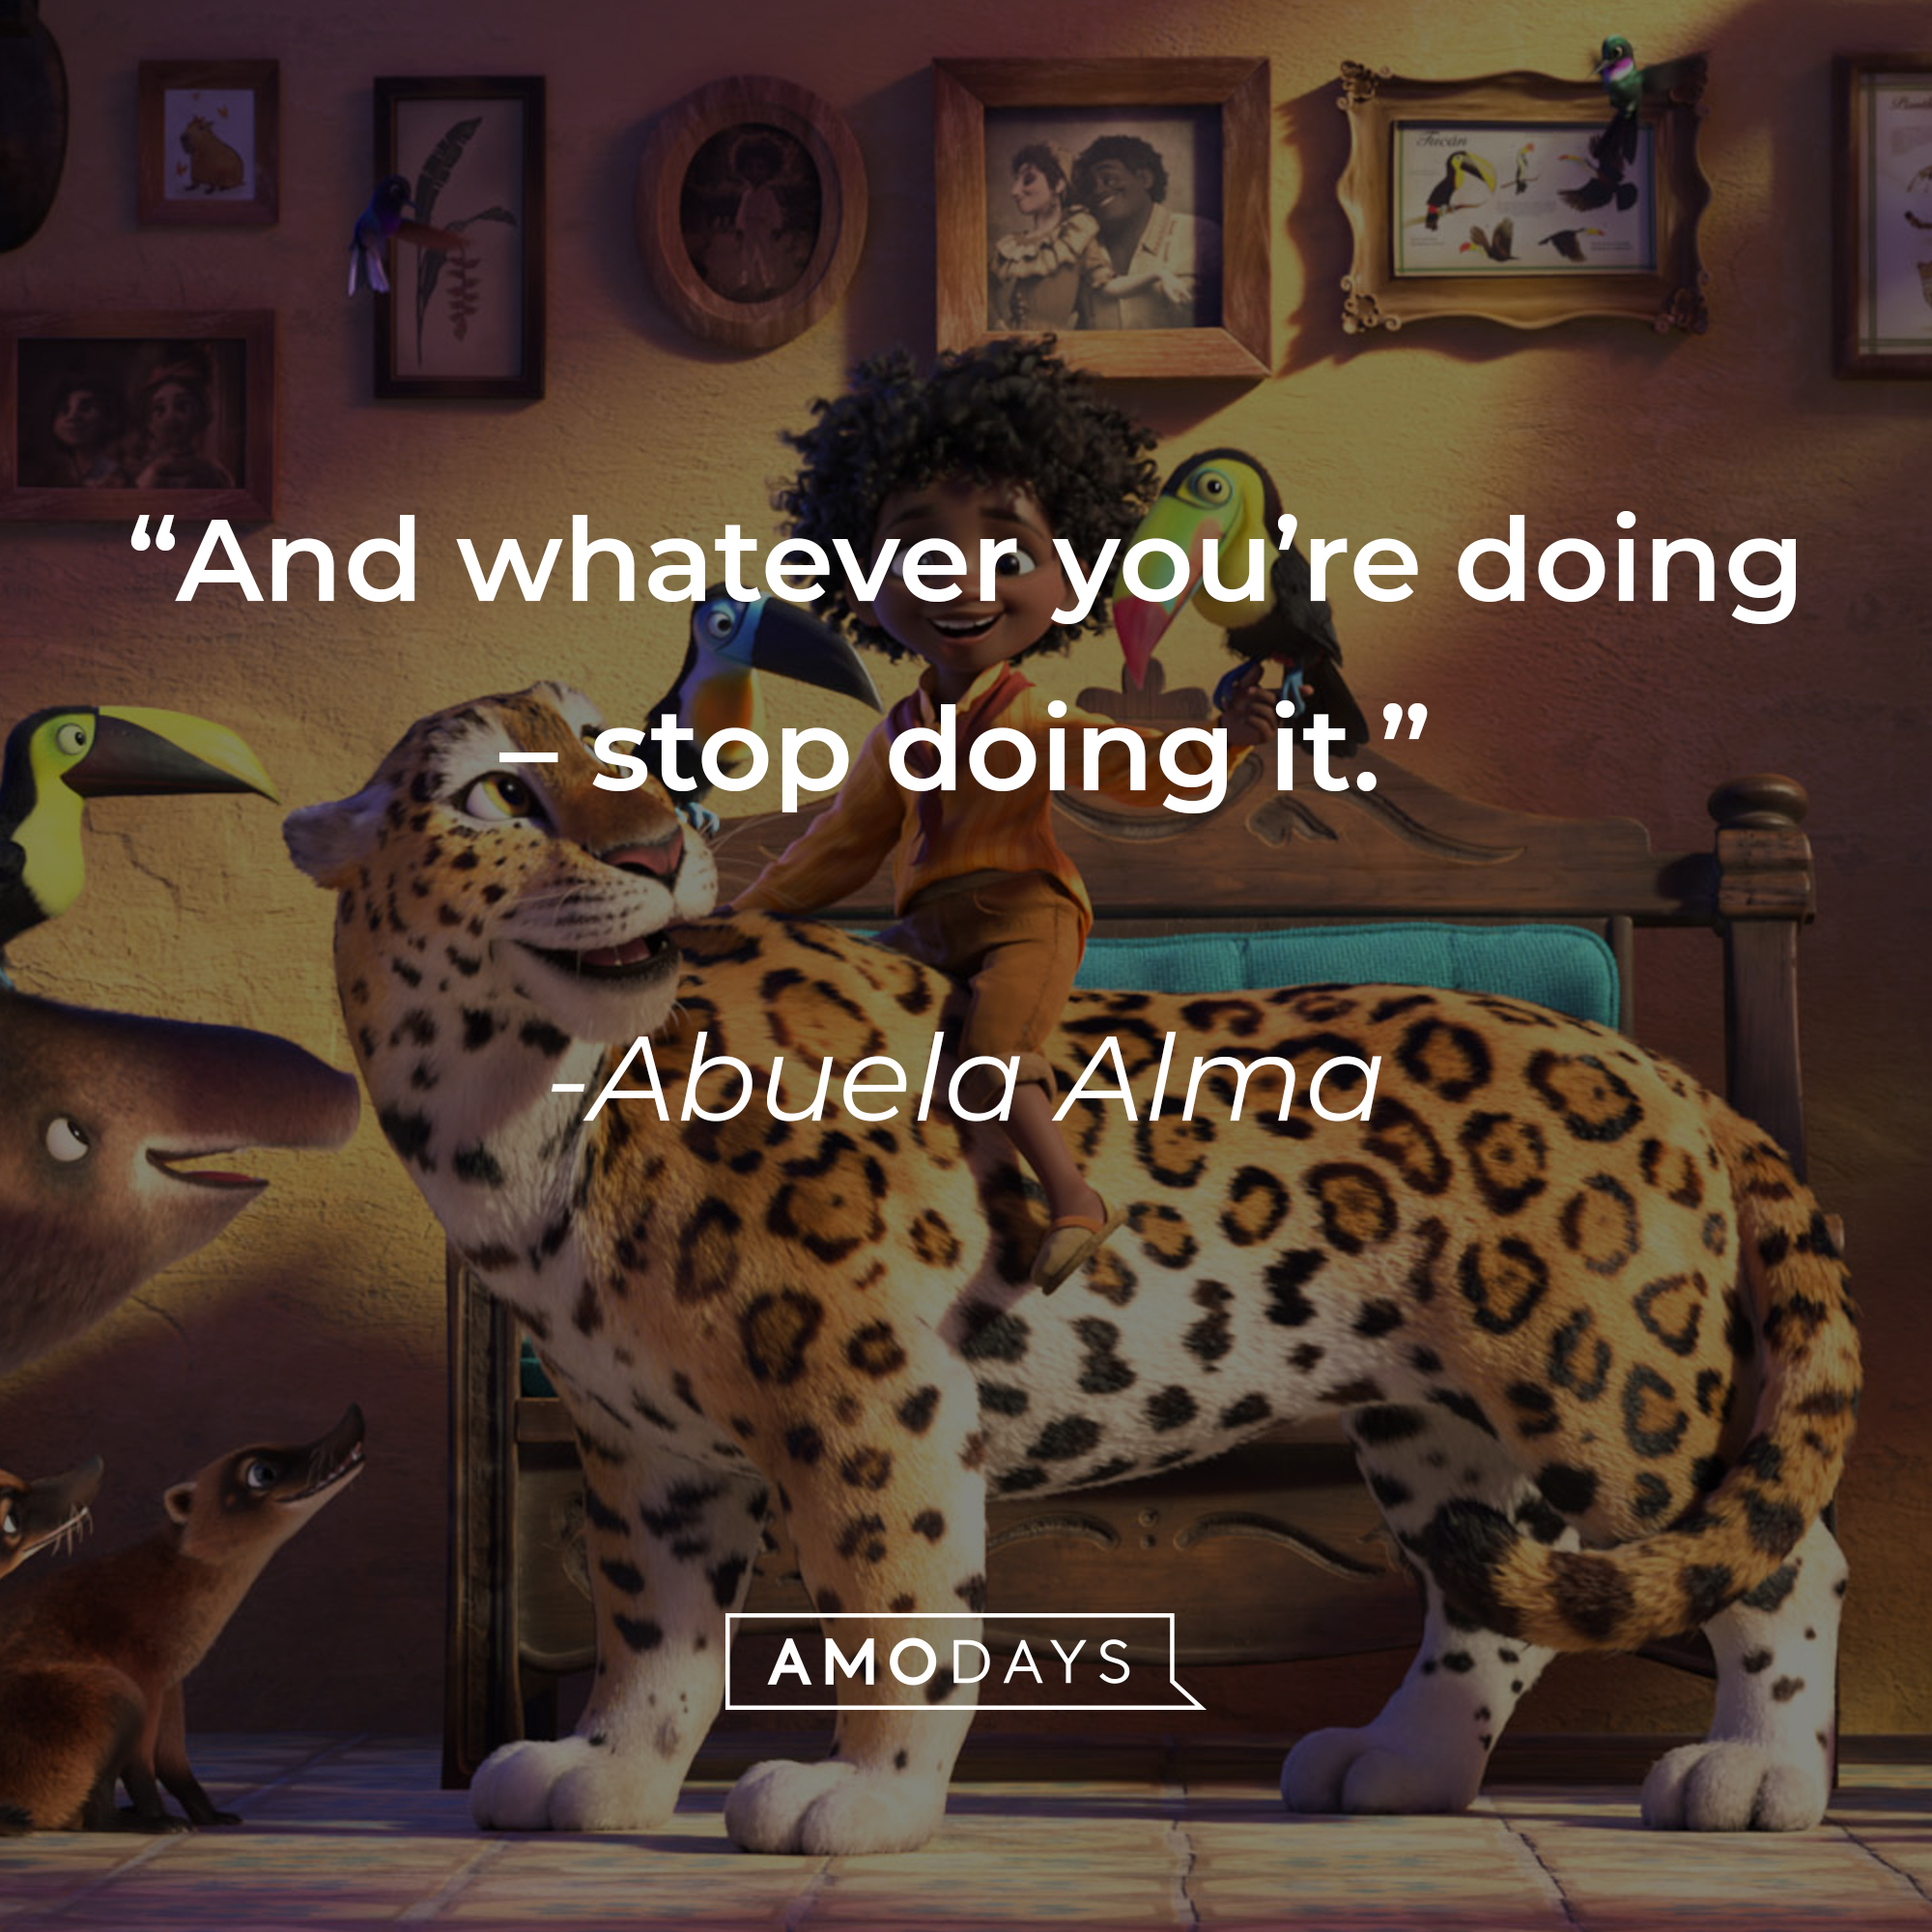 Abuela Alma's quote: “And whatever you’re doing – stop doing it." | Source: facebook.com/EncantoMovie